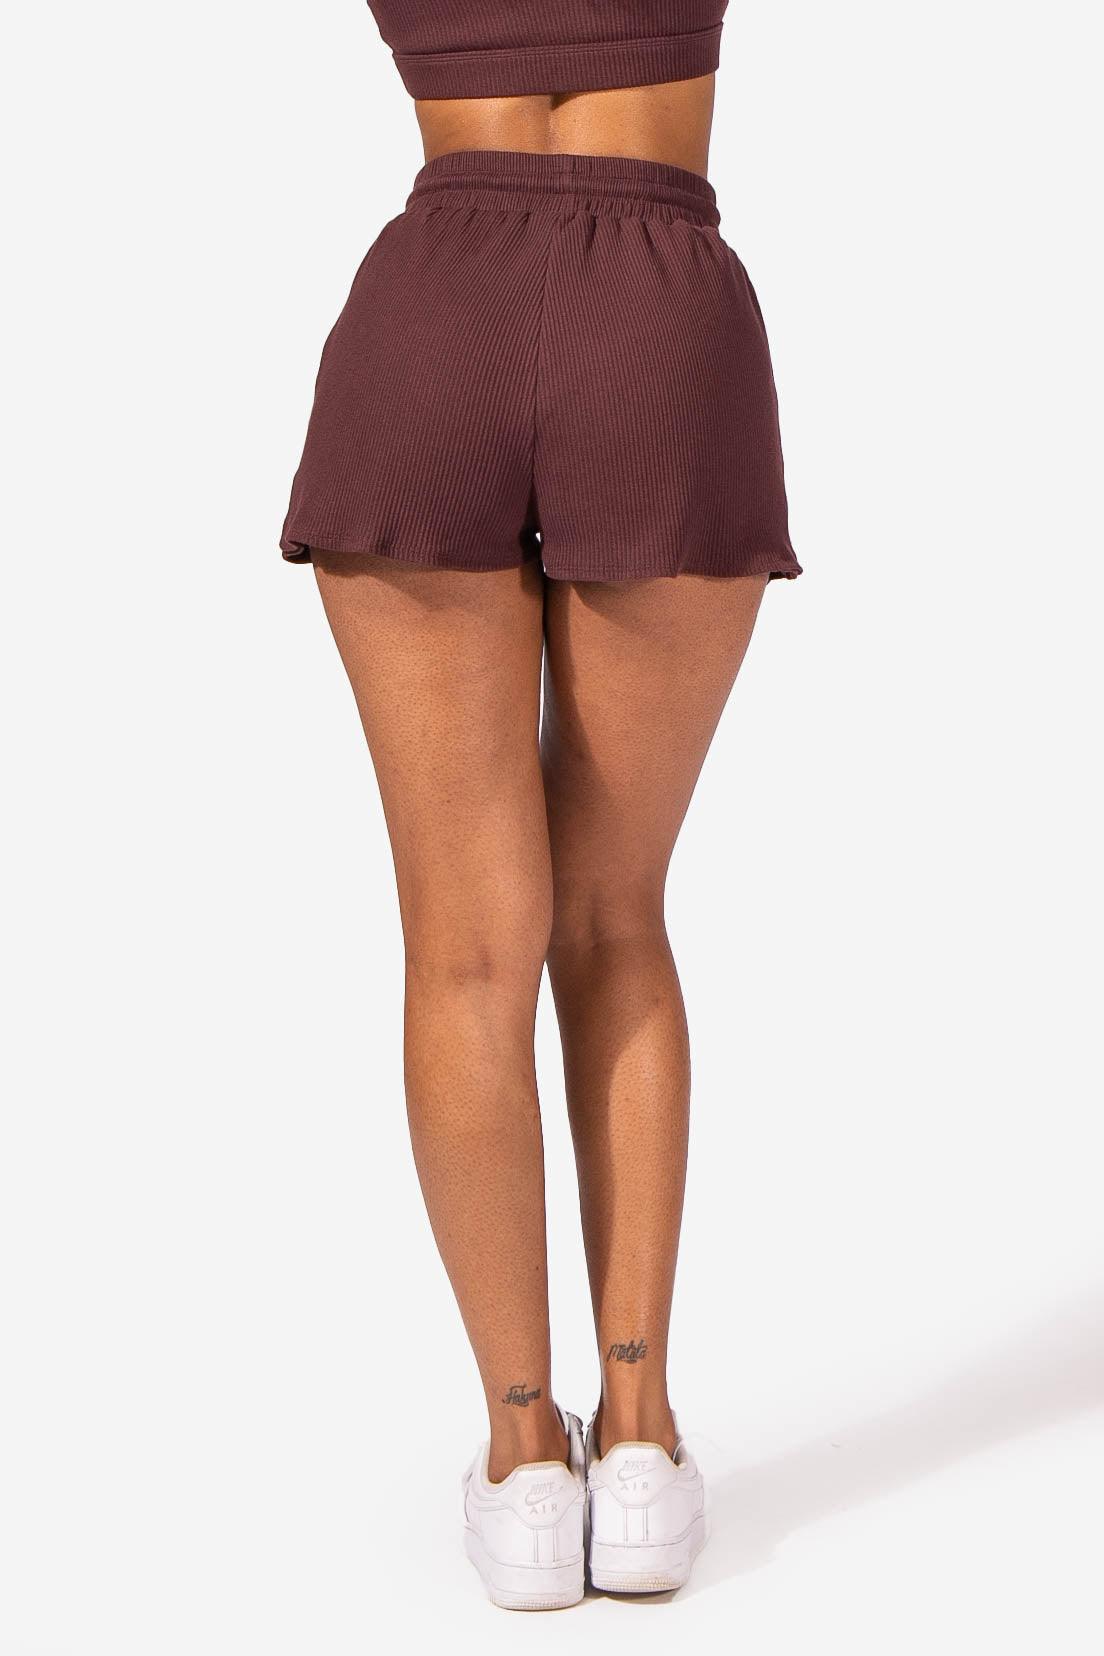 Ribbed Flowy Summer Shorts With Pockets - Brown (6569729196099)